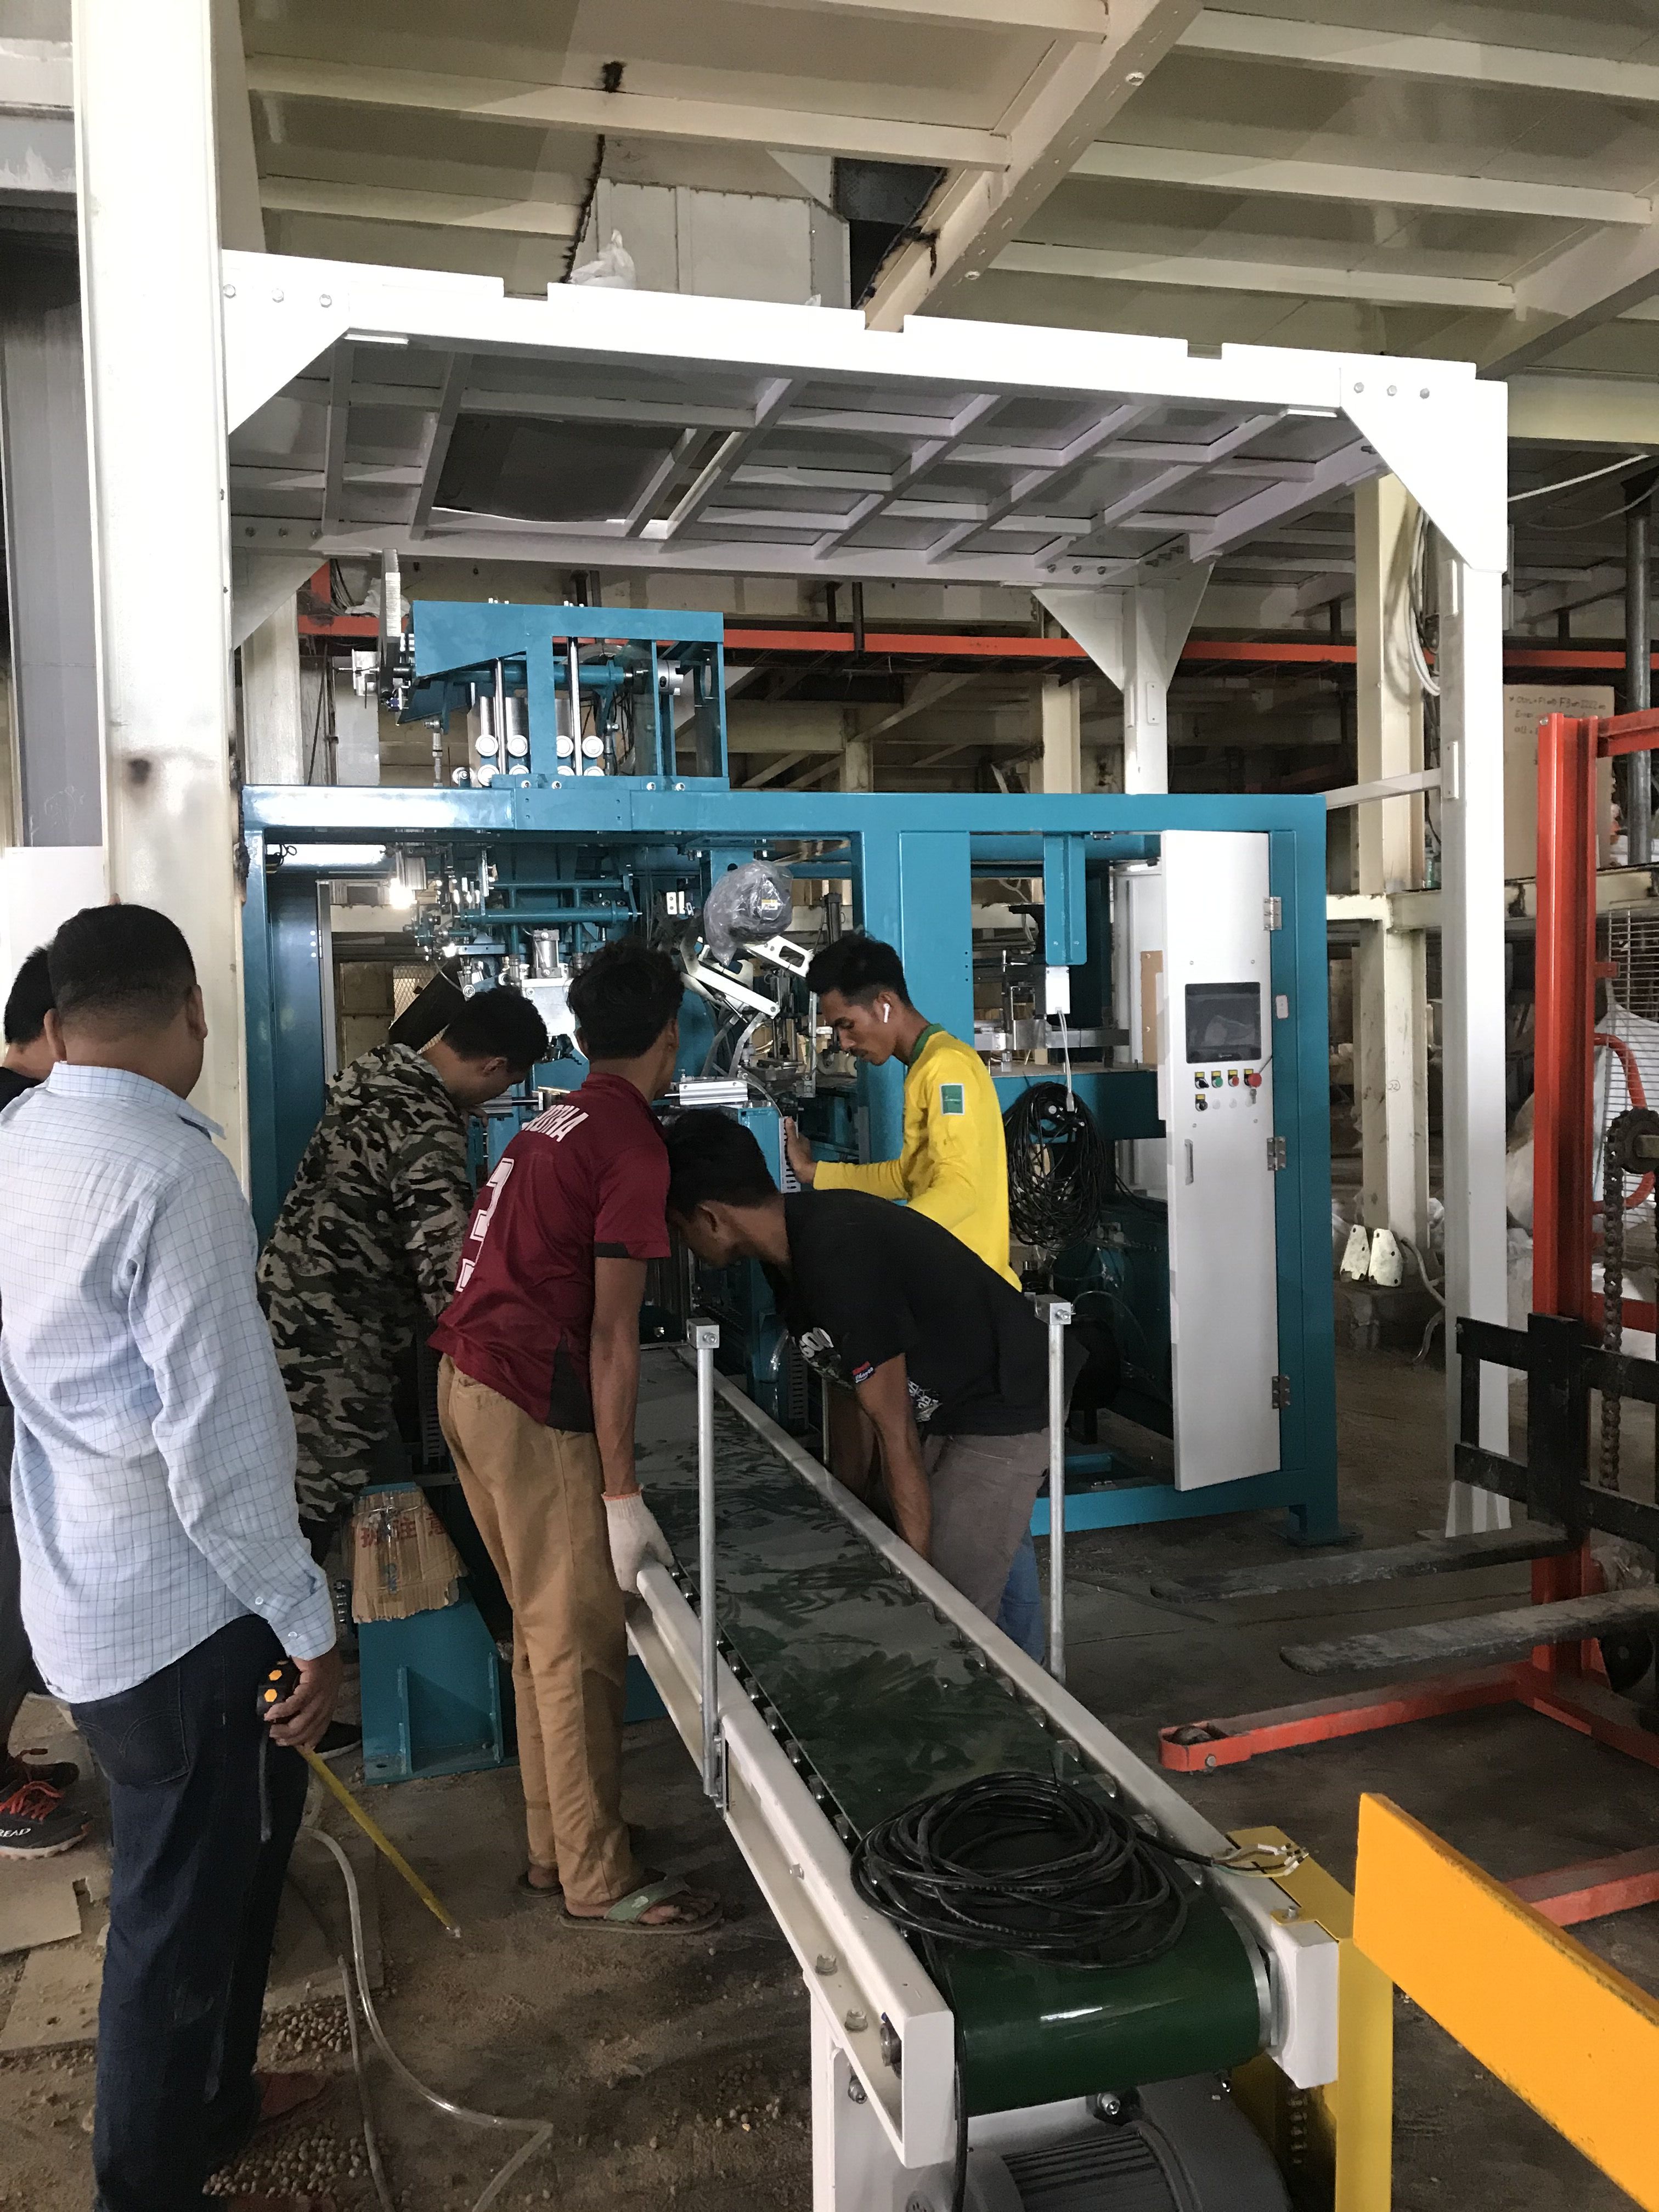 full automatic Bagging machine for Urea and fertilizer products full automatic PACKING, WEIGHING AND SEWING MACHINE full automatic packaging line full automatic flour bagging palletizing and wrapping 